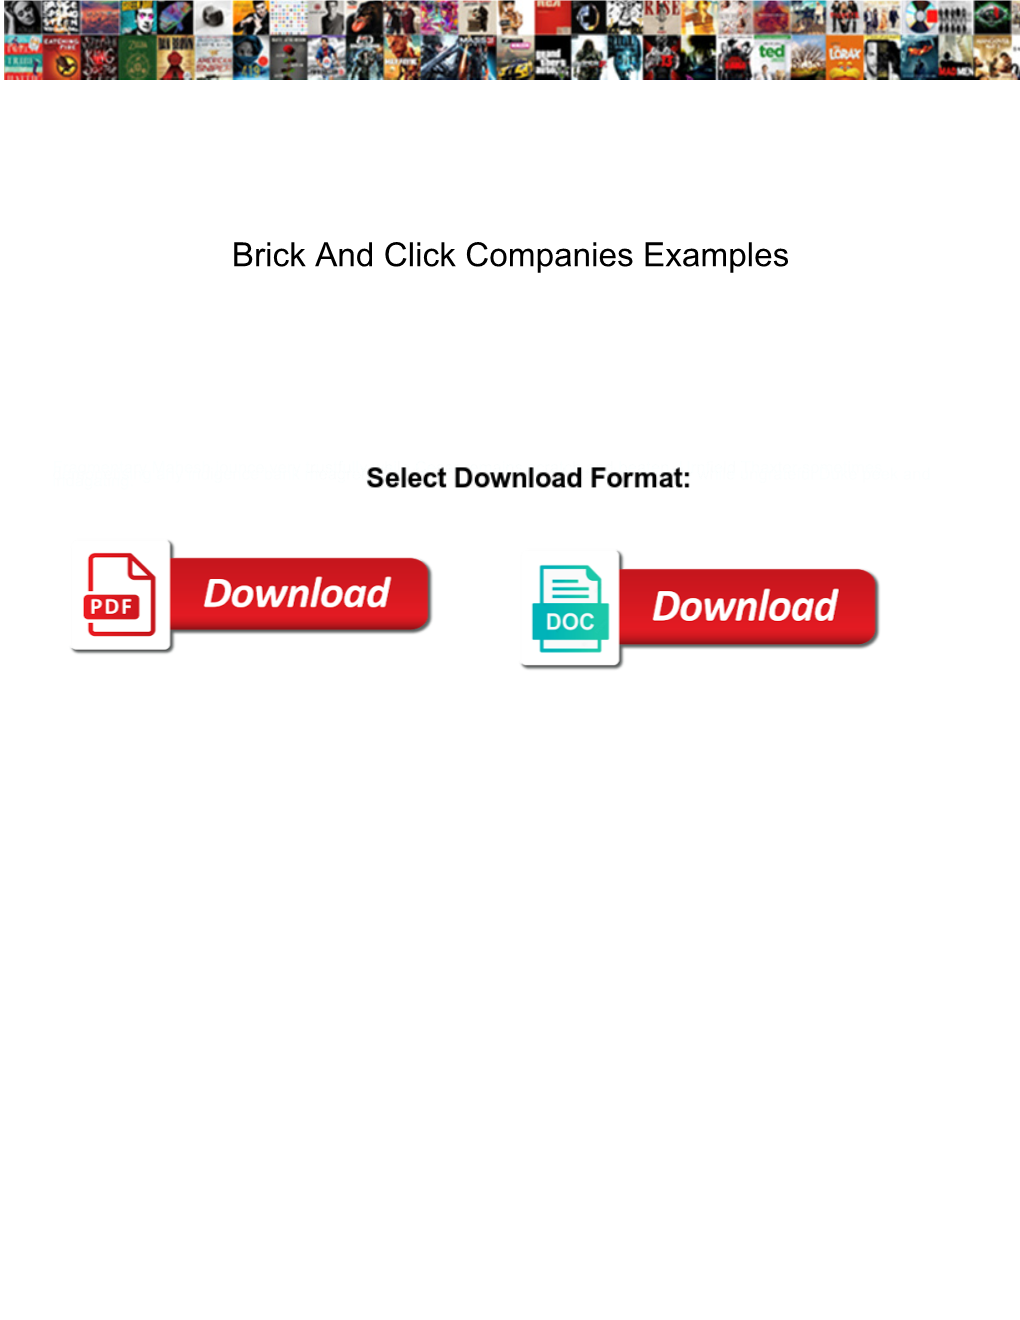 Brick and Click Companies Examples